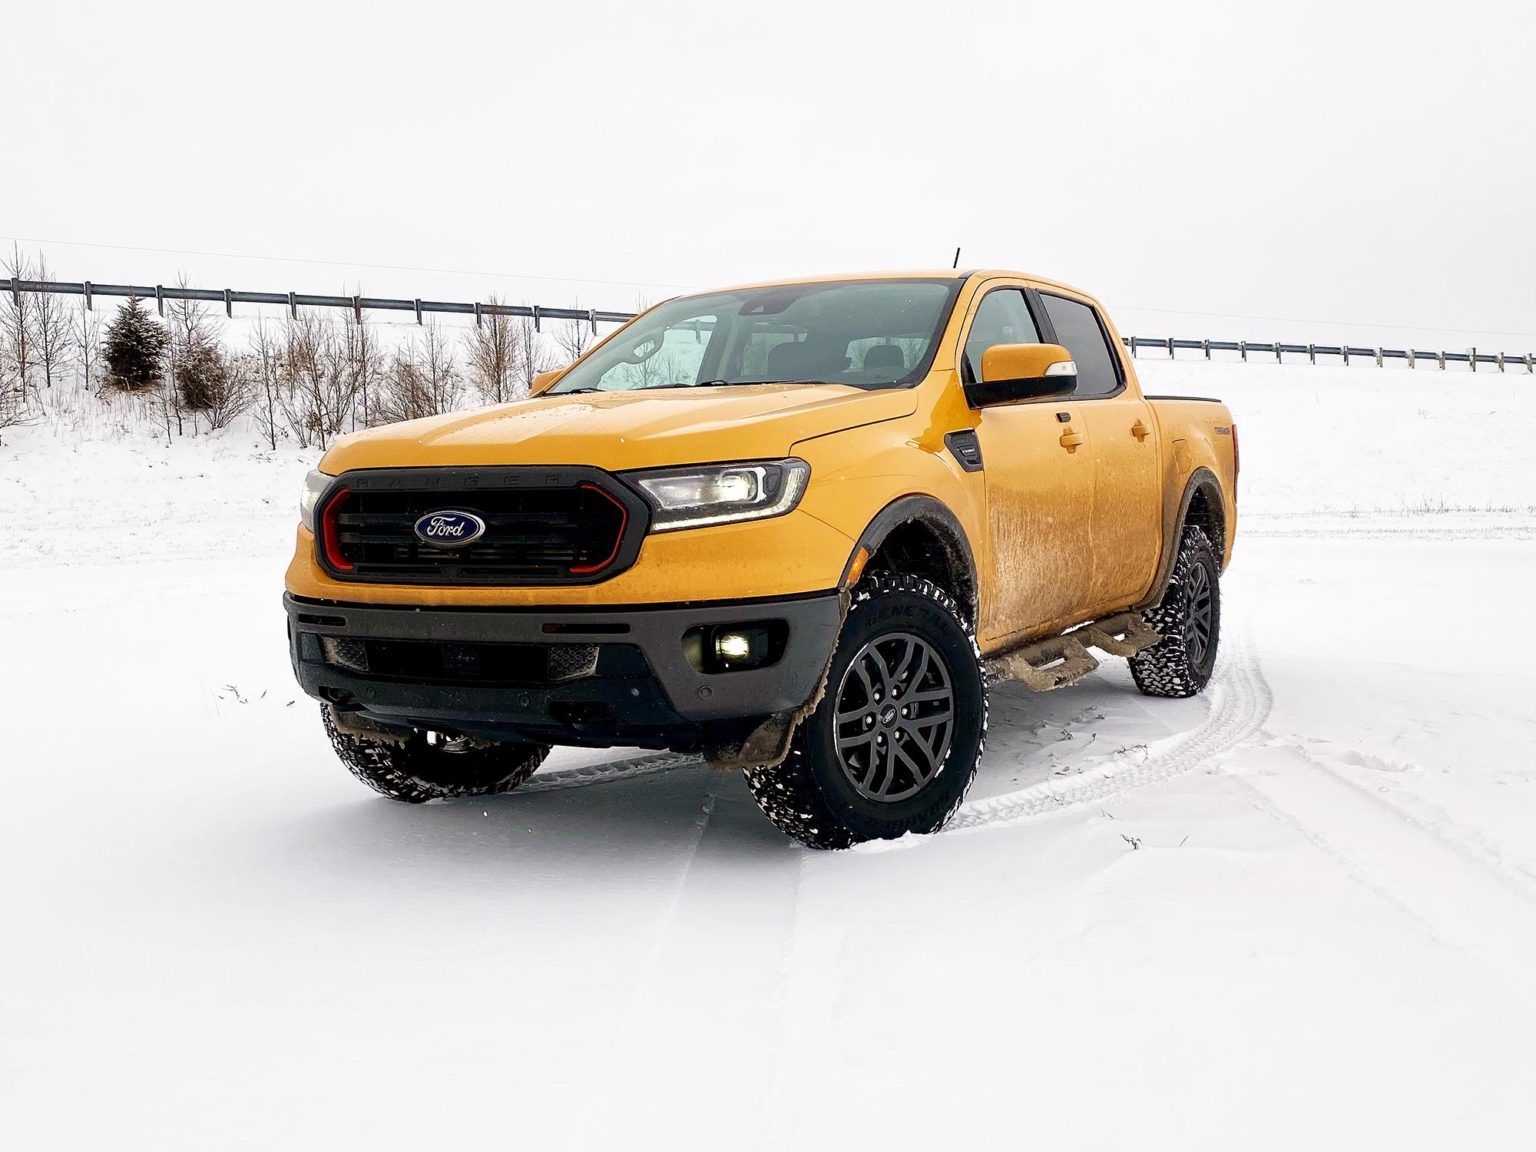 The Tremor package is newly offered on the Ranger for the 2021 model year.